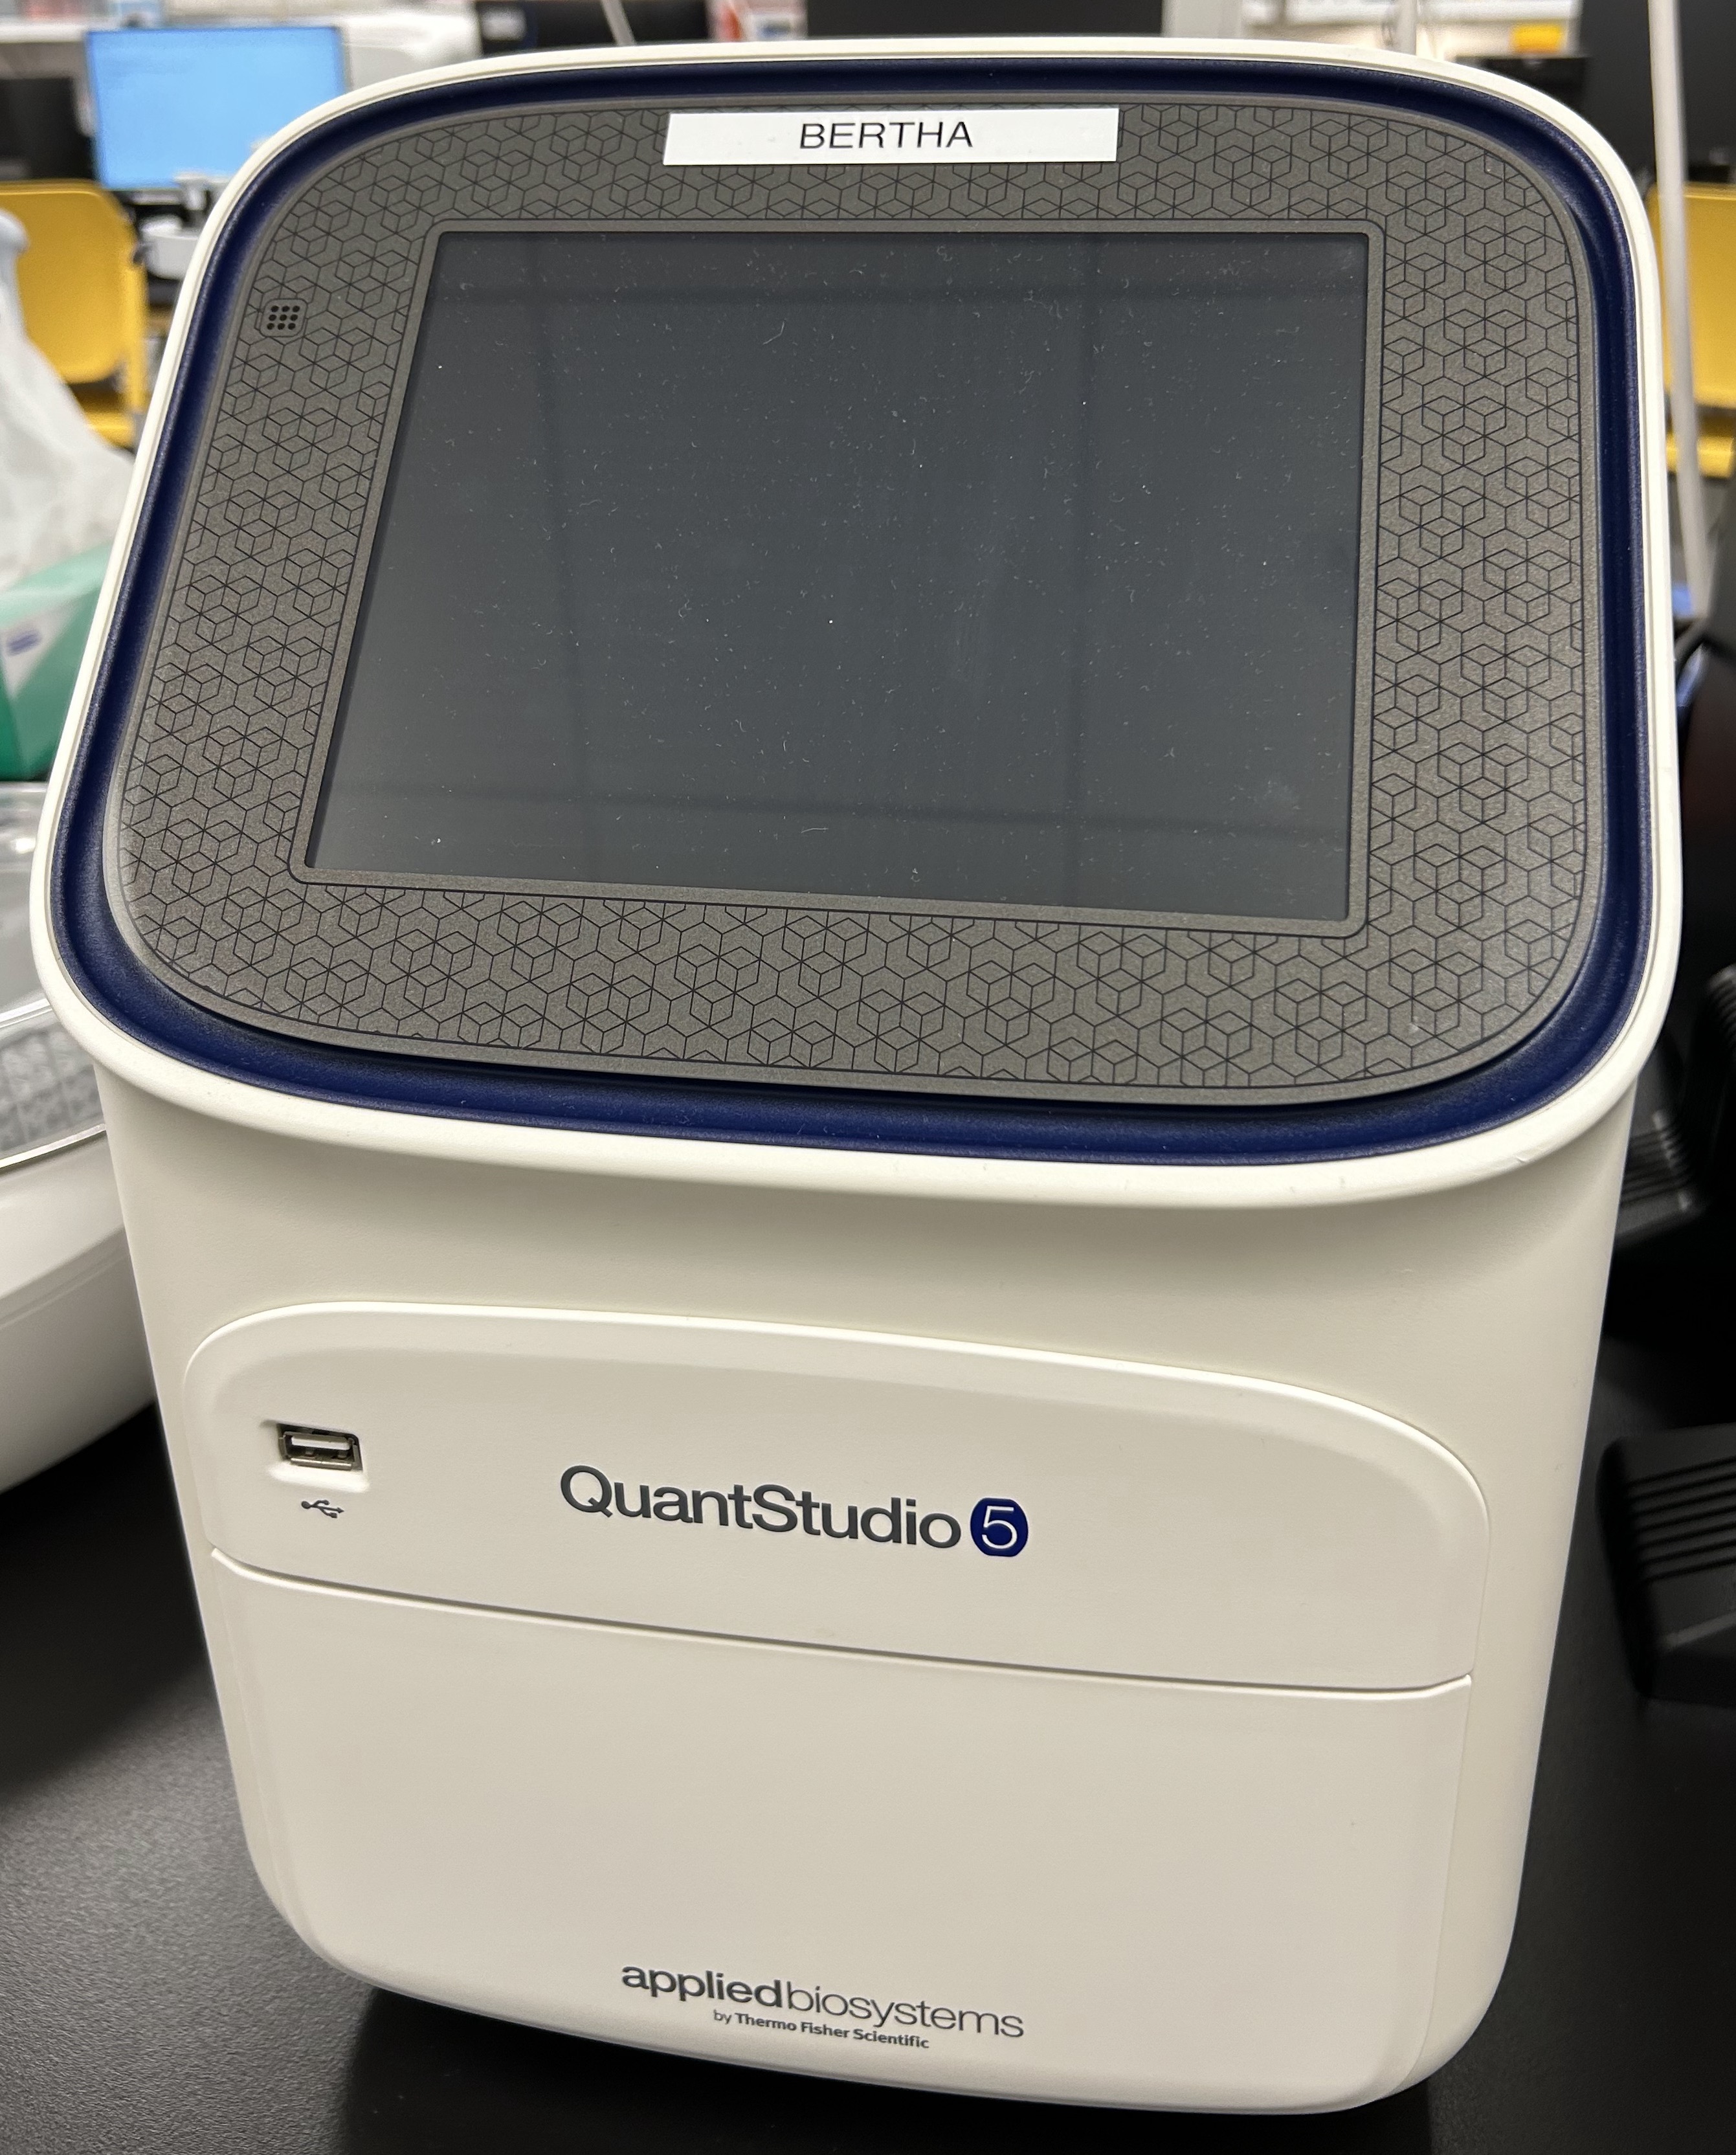 Applied Biosystems QuantStudio 5 Real Time PCR System